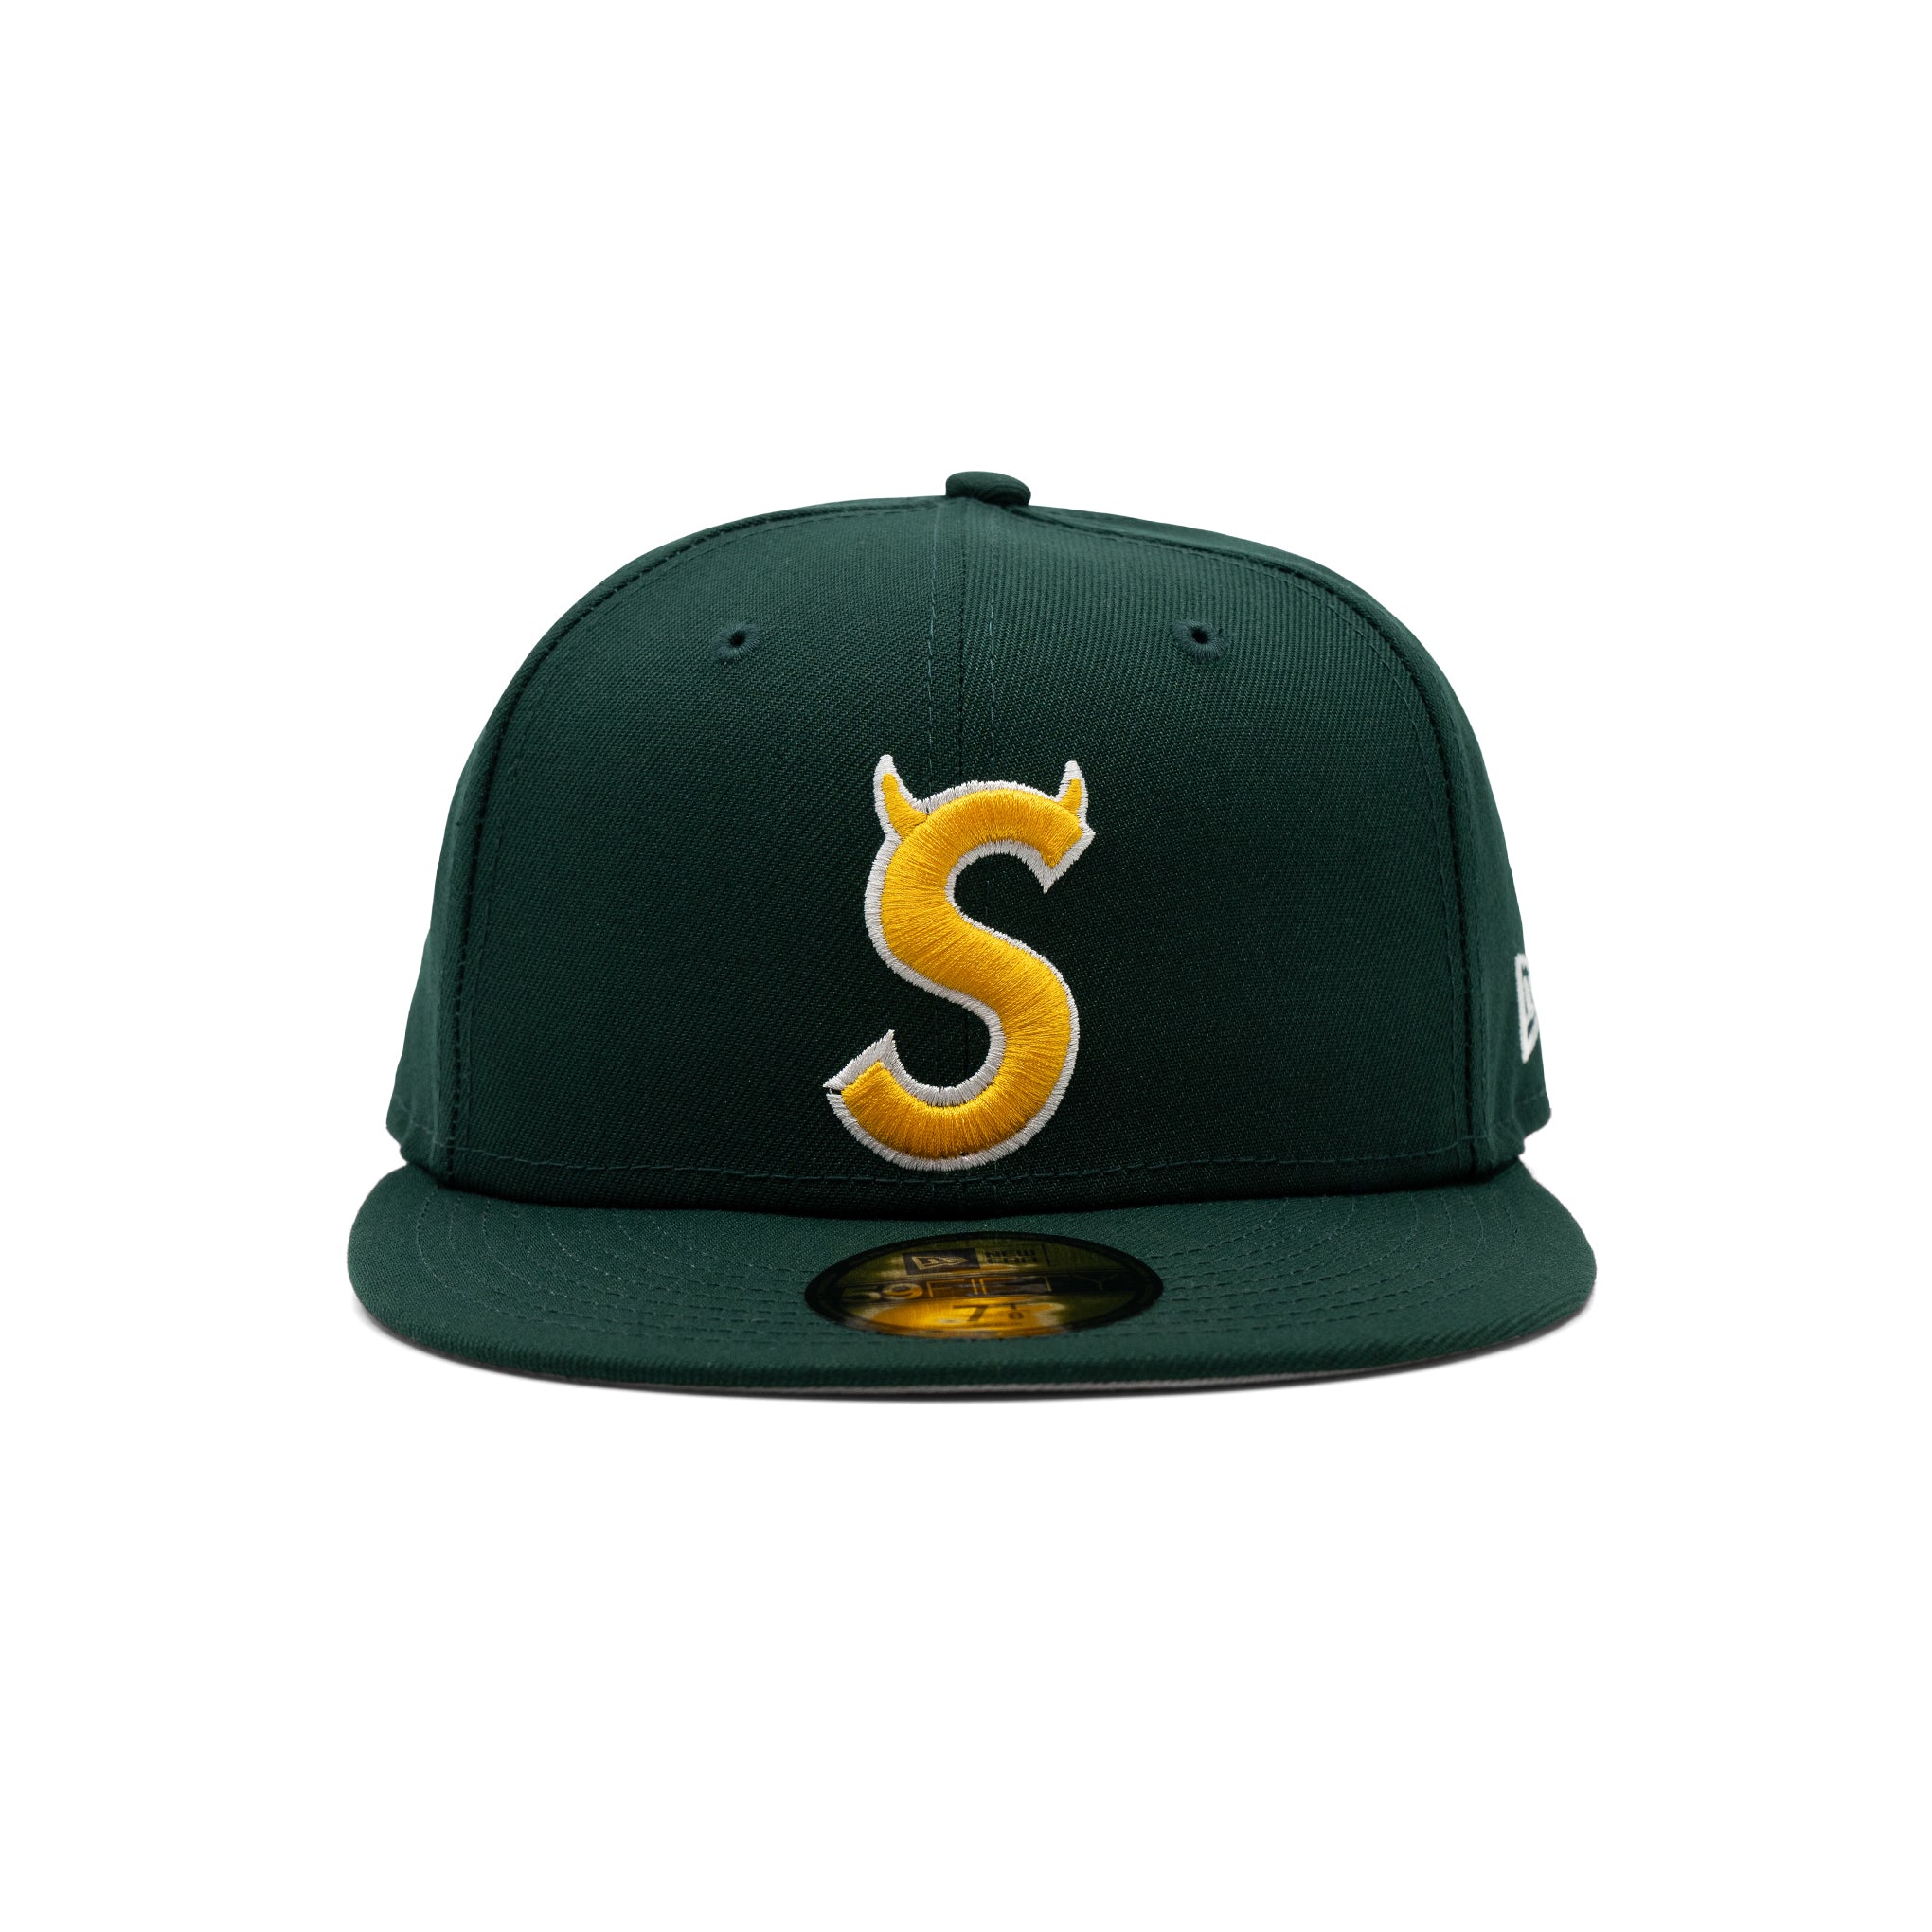 SUPREME NEW ERA S LOGO FITTED GREEN